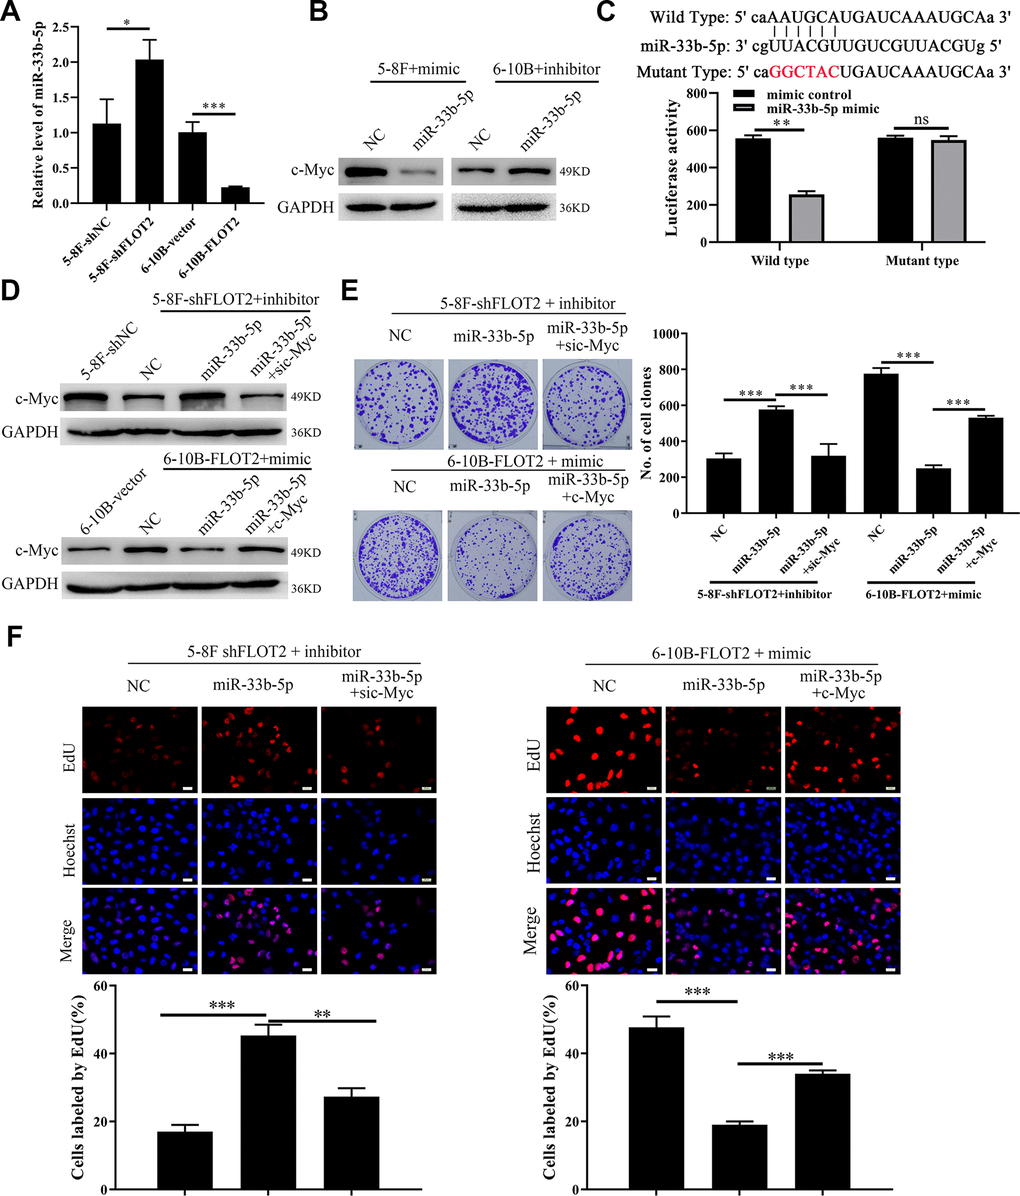 FLOT2 regulates c-Myc and promotes cell proliferation via inhibiting miR-33b-5p in NPC. (A) qPCR assay demonstrating the relative expression of miR-33b-5p in 5-8F-shFLOT2, 6-10B-BCAT1 and control cells. (B) Western blot showing the level of c-Myc in 5-8F and 6-10B cells transfected with miR-33b-5p mimic and inhibitor, respectively. (C) Luciferase activities of 5-8F cells co-transfected with miR-33b-5p+wild type c-Myc and miR-33b-5p+mutant type c-Myc, respectively. (D) Western blot showing the level of c-Myc in 5-8F-shFLOT2, 5-8F-shFLOT2+miR-33b-5p inhibitor, 5-8F-shFLOT2+miR-33b-5p inhibitor+sic-Myc, 6-10B-FLOT2, 6-10B-FLOT2+miR-33b-5p mimic, 6-10B-FLOT2+miR-33b-5p mimic+c-Myc and control cells. (E, F) Plate clone formation and EdU assays showing the growth and proliferation abilities of 5-8F-shFLOT2, 5-8F-shFLOT2+miR-33b-5p inhibitor, 5-8F-shFLOT2+miR-33b-5p inhibitor+sic-Myc, 6-10B-FLOT2, 6-10B-FLOT2+miR-33b-5p mimic, 6-10B-FLOT2+miR-33b-5p mimic+c-Myc cells. *, P P P 